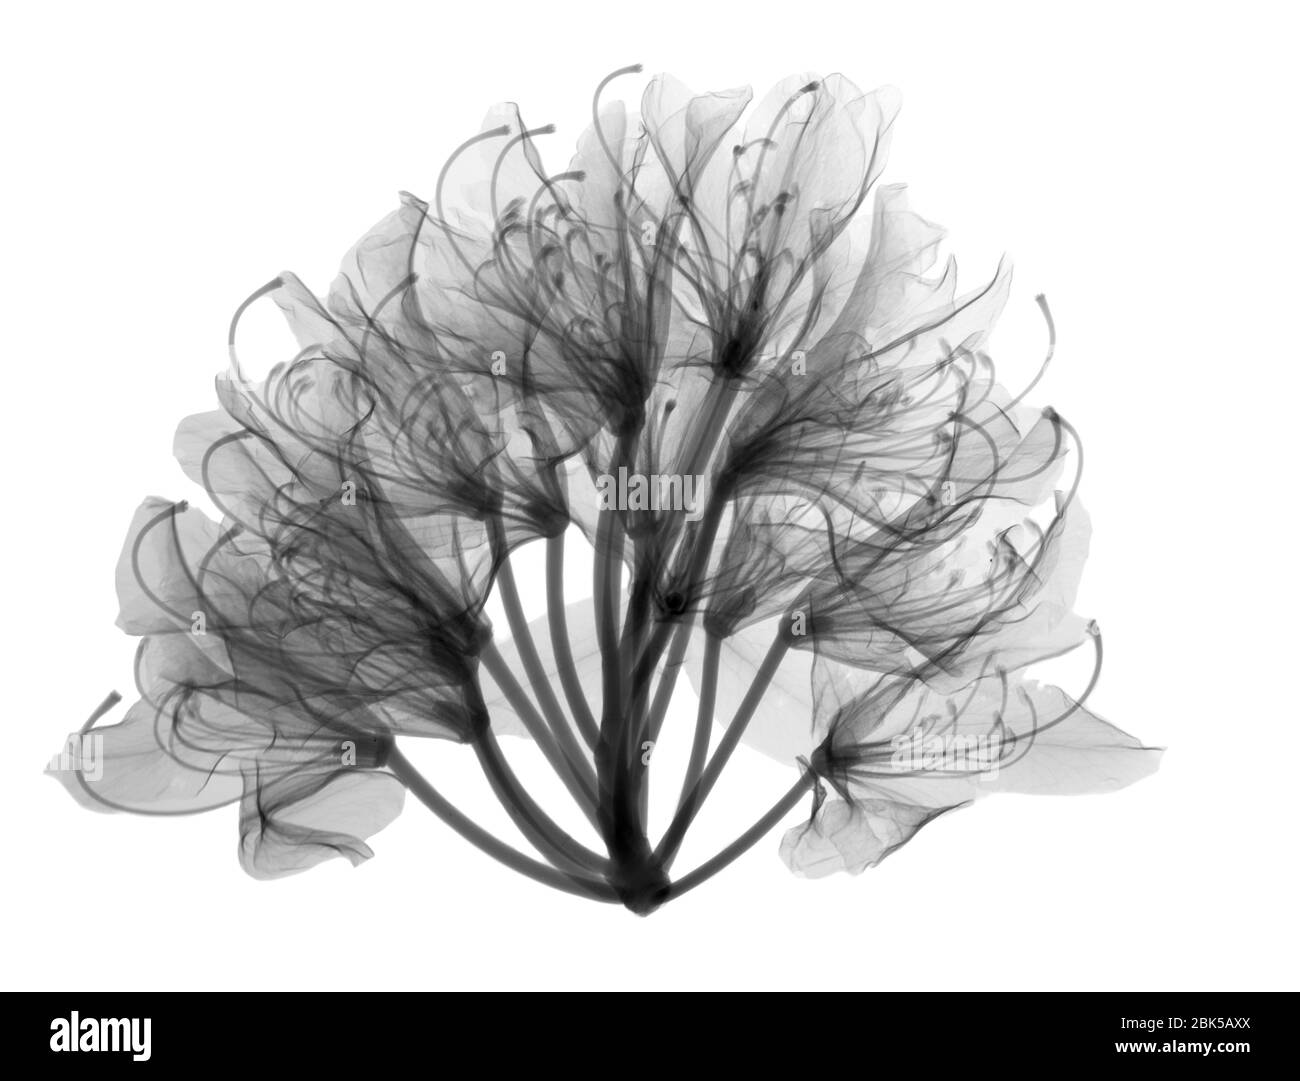 Dendron Black and White Stock Photos & Images - Alamy